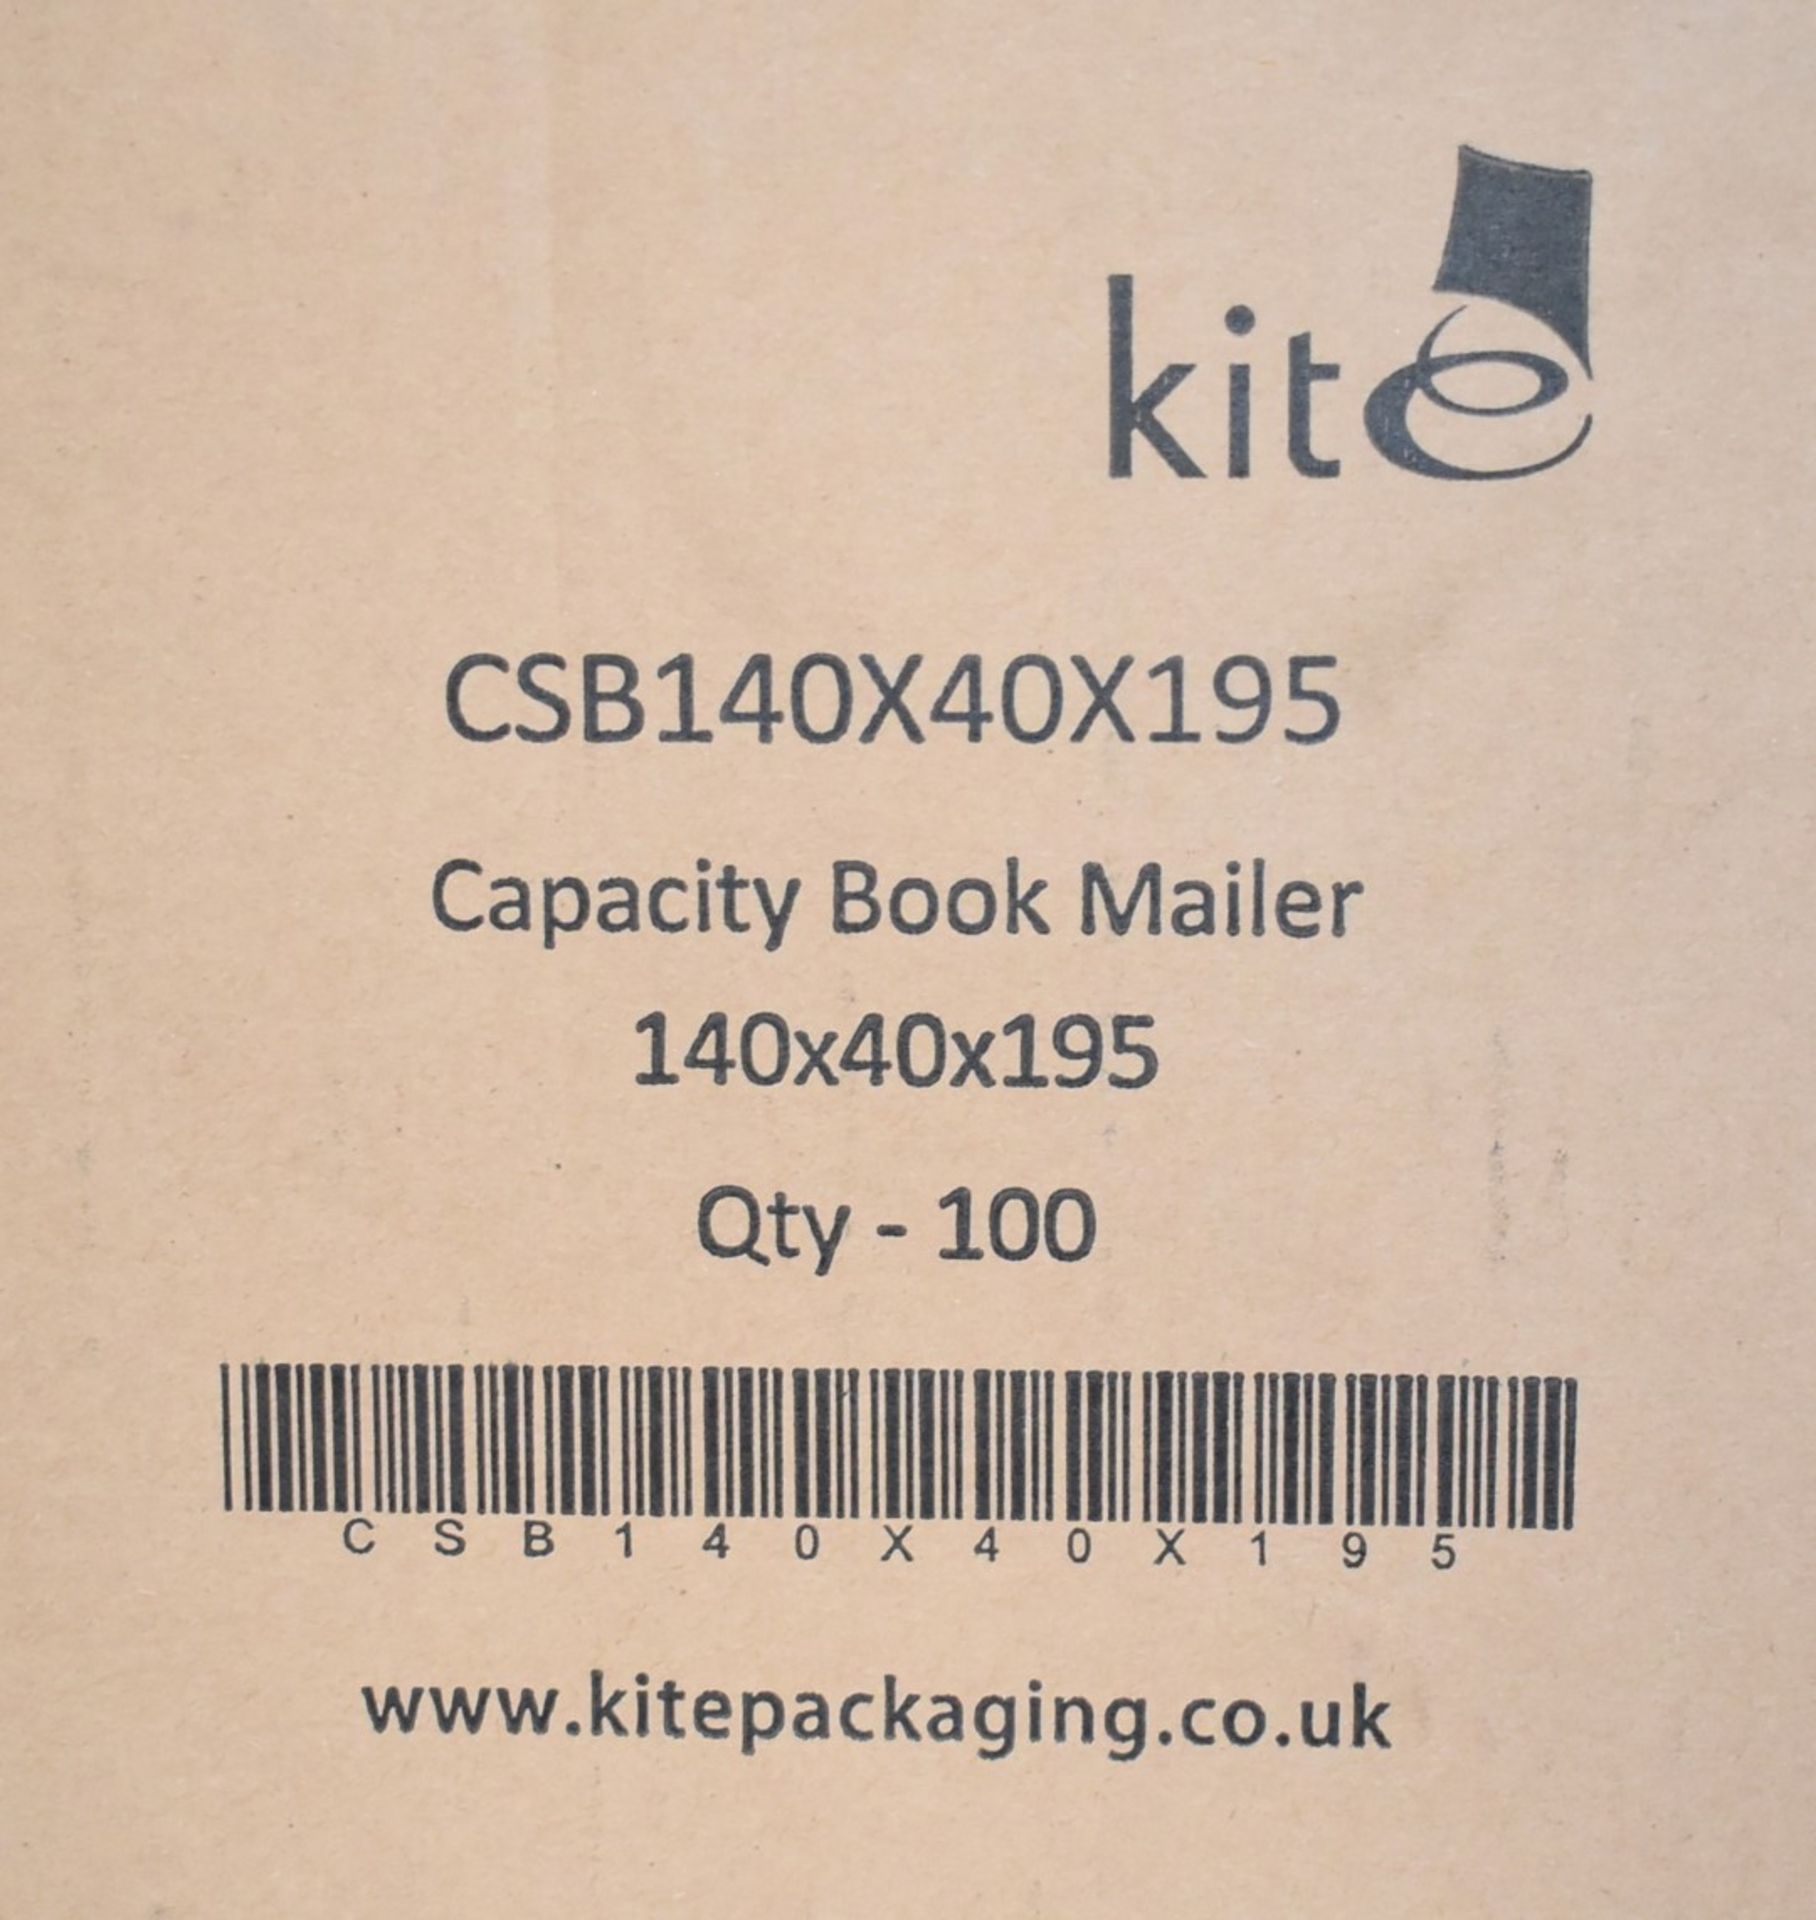 200 x Capacity Book Mailer Cardboard Envelopes - Size: 140 x 140 x 195mm - Includes 2 x Boxes of 100 - Image 3 of 6